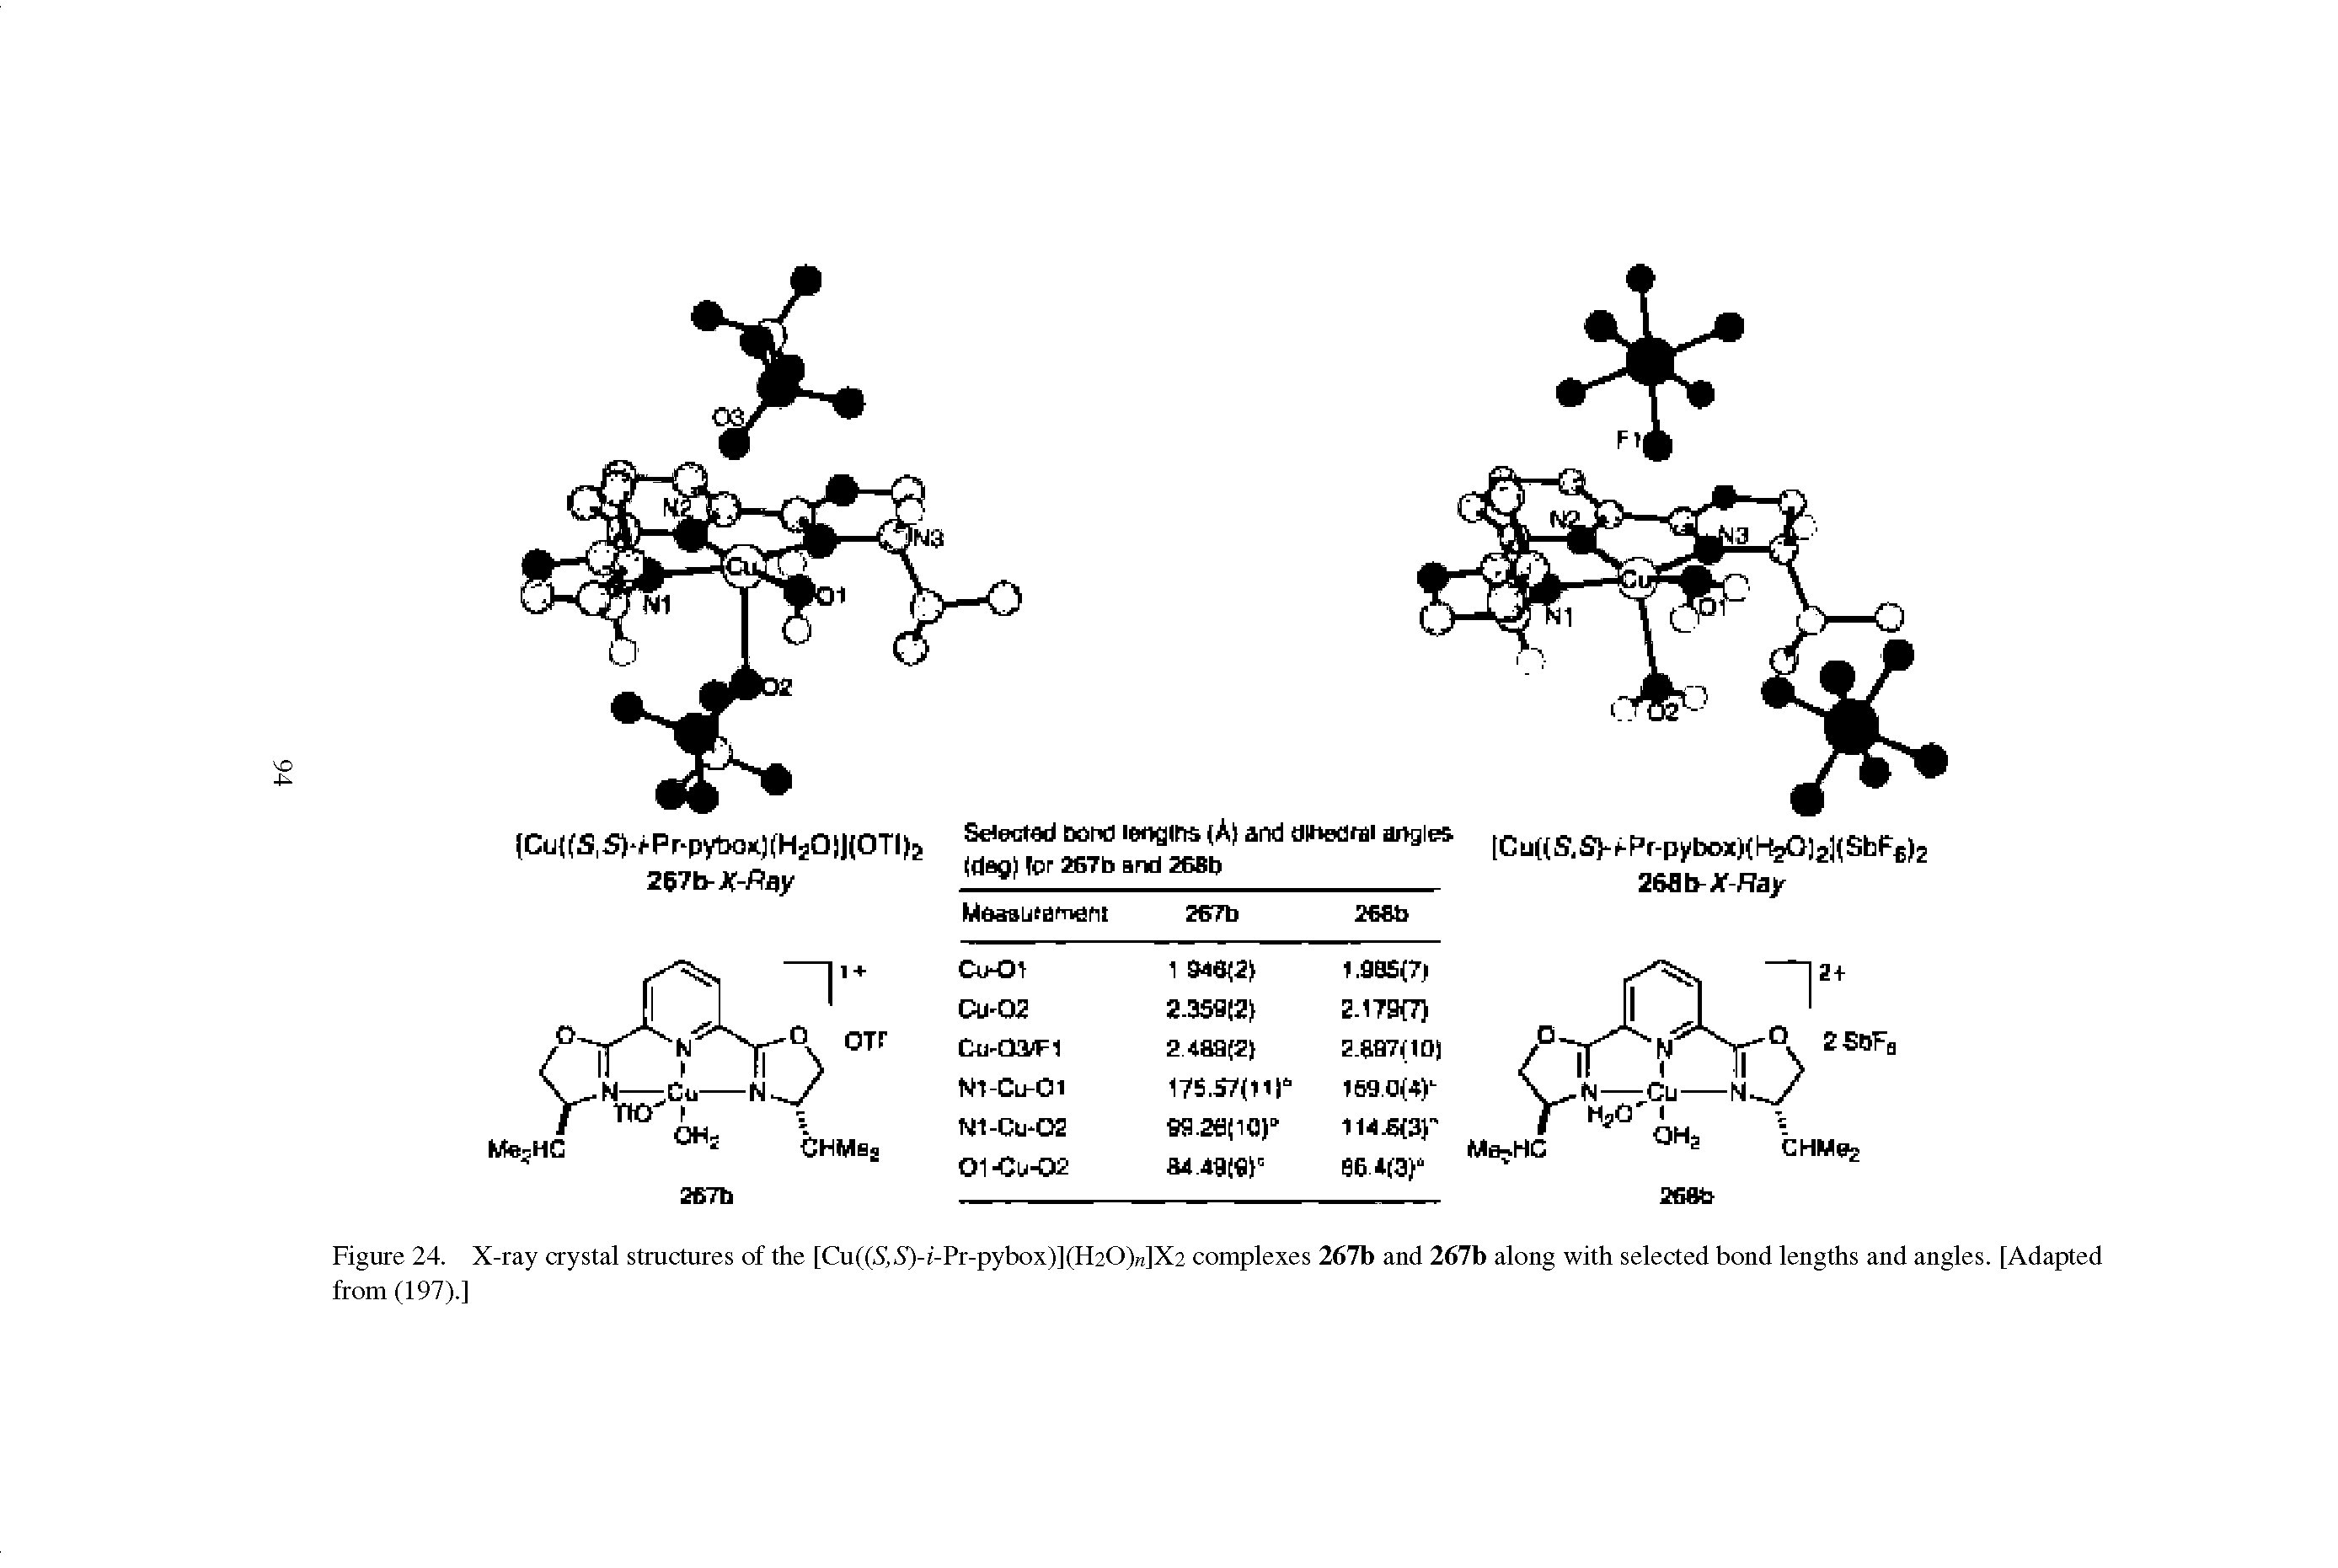 Figure 24. X-ray crystal structures of the [Cu((5, 5)-i-Pr-pybox)](H20)n]X2 complexes 267b and 267b along with selected bond lengths and angles. [Adapted from (197).]...